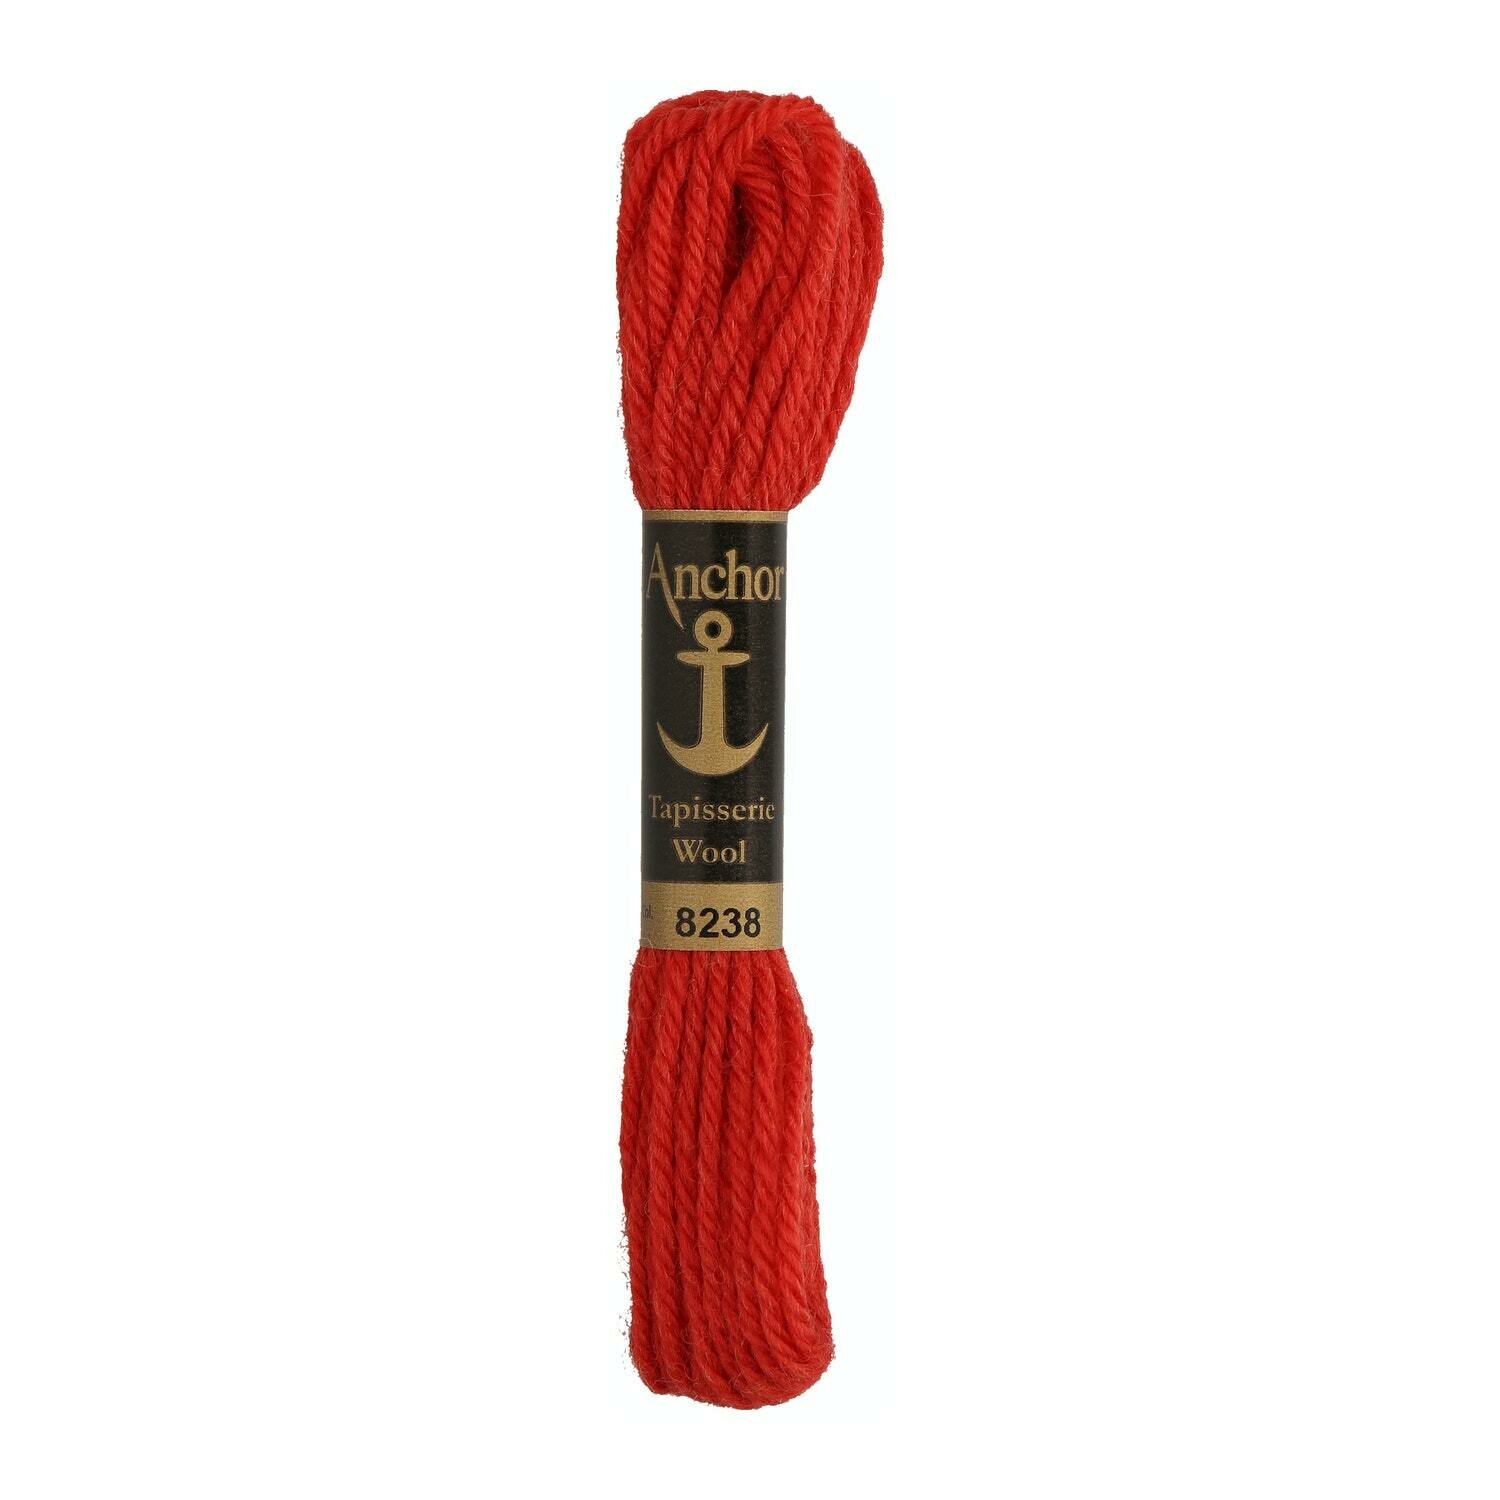 Anchor Tapisserie Wool #  08238